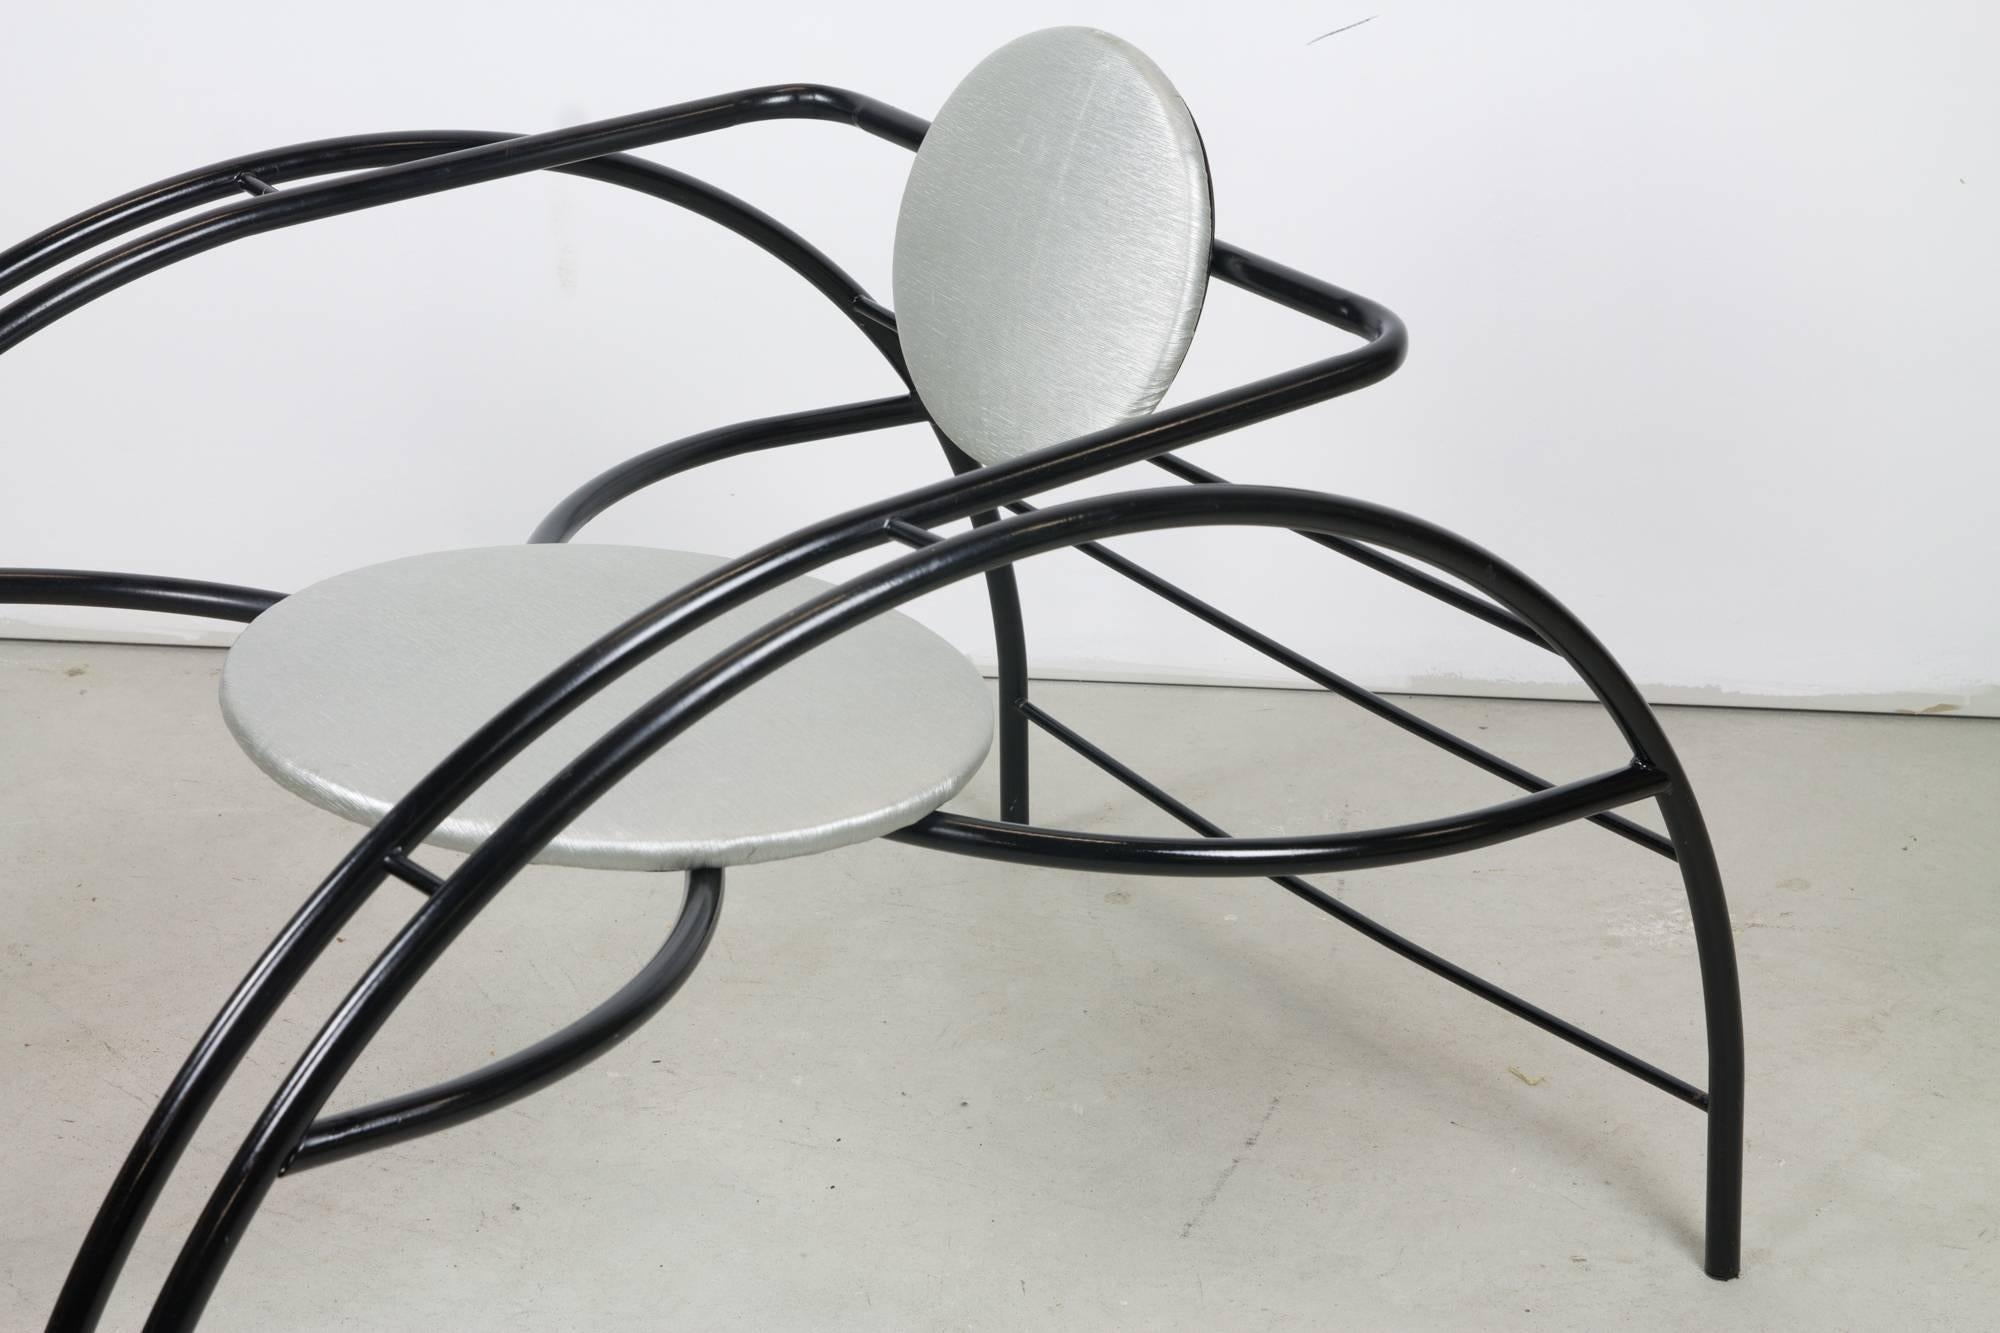 The Quebec 69 spider chair by Canadian postmodern Design Group Les Amisca featuring a bold exoskeleton of tubular steel, punctuated by a circular seat and backrest. Calling on tropes of Art Deco and the Machine Age, this chair serves as both a